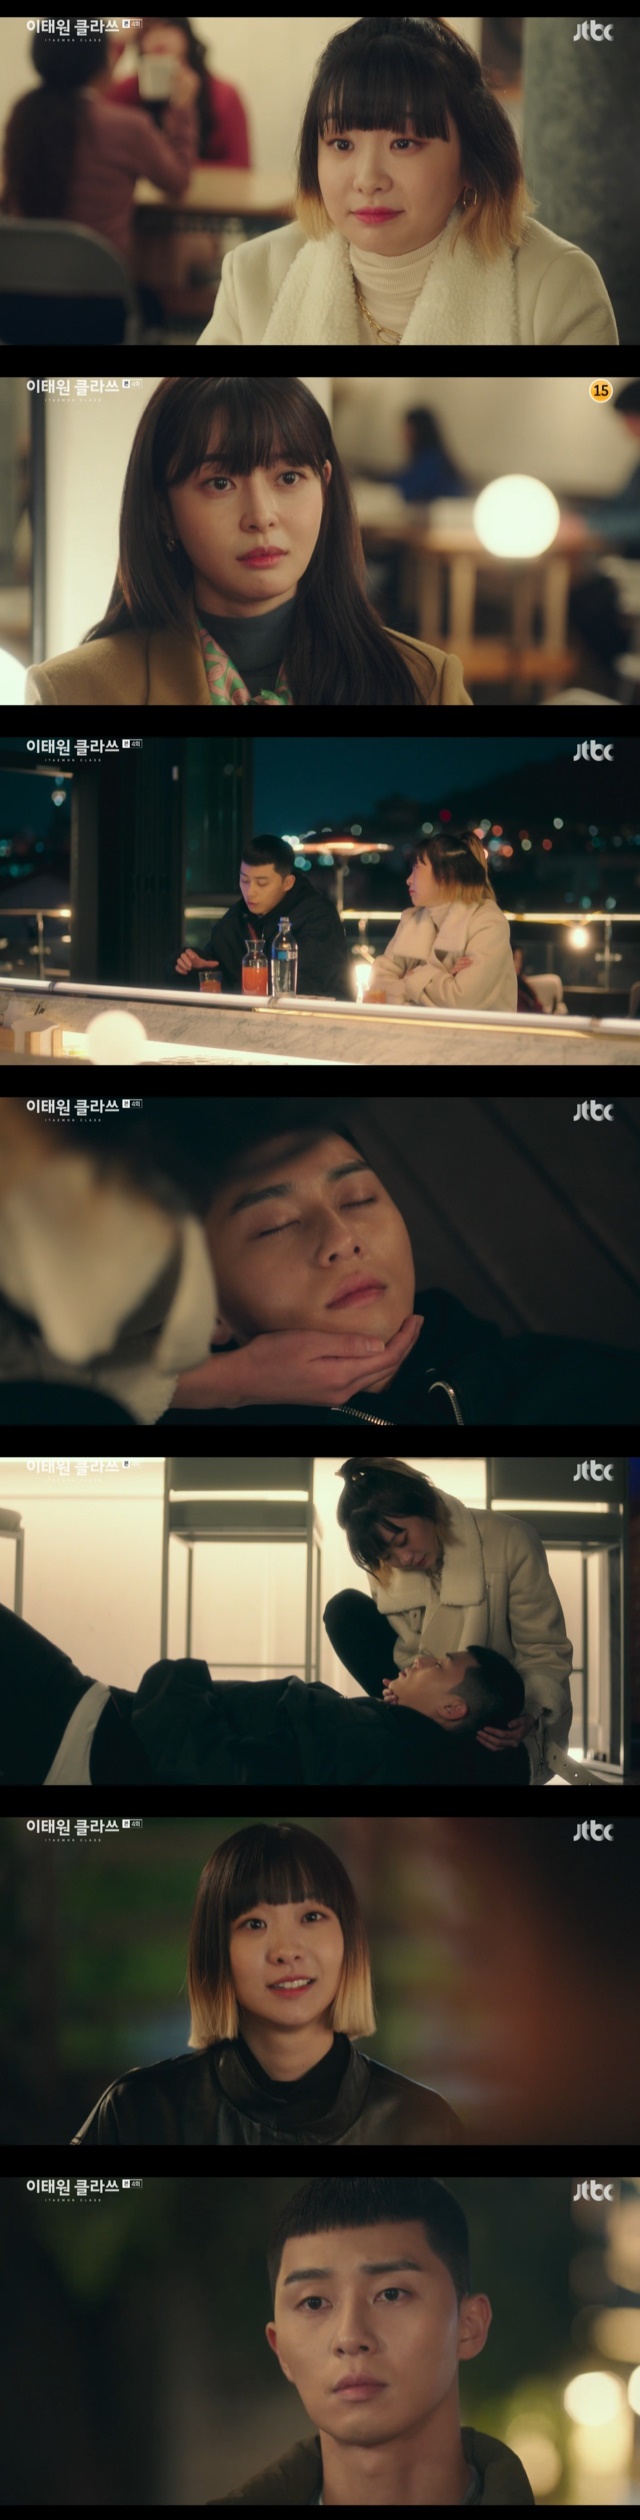 Kim Da-mi, who realized his mind toward Park Seo-joon, decided to work at the shop of Park Seo-joon.In the 4th episode of JTBCs gilt drama Itaewon Klath (playplayed by Cho Kwang-jin/directed by Kim Sung-yoon) broadcast on February 8, Park Sae-ro-yi (Park Seo-joon) accidentally confronted Joyseo (Kim Da-mi) after the business suspension.Park Sae-ro-yi, who met the Fountainhead (Security), told The Fountainhead, who mocked and provoked him, Ive endured it for nine years now.Ill hold on for another six years. My plan is fifteen years. Your statute of limitations. Ill stick, and Ill give you the right.Park Sae-ro-yis shop was suspended due to Choi Seung-kwons mistake (Ryu Kyung-soo); in the meantime, Joy Seo became an adult.Joy, who had passed all the colleges he wanted but still felt bored, was assaulted by a Cuckold who met him at a drink.In the Cuckold toilet, which rushed in to avoid the chasing Cuckold, Joyser was reunited with Park Sae-ro-yi.Cuckold pretended to be Joy and his lover and told him not to mind, but Park Sae-ro-yi looked at Joysers face, which was swollen red.Park Sae-ro-yi asked Joyser, If I interrupt now, Ill come here, and if you dont tell me, I cant do anything.Joyser replied, Please help me, and Park Sae-ro-yi beat Cuckold and then ran away with Joy and Oh Soo-ah (Kwon Na-ra).Oh Soo-ah was stunned to learn that this mess had happened because of Joy.Joy suggested Park Sae-ro-yi drink tea in the name of paying grace and telling him how to promote shop.Joy, who visited the cafe with Park Sae-ro-yi and Oh Soo-ah, asked Oh Soo-ah how they were. Oh Soo-ah said, I am a friend.But the new Roy likes me, he said confidently.While Park Sae-ro-yi was away, Oh Soo-ah told Joyser, who approaches Park Sae-ro-yi even though he knows he is an ex-convict of attempted murder, I am not a child like you.Im sorry youre the reason Im suspended for the new Roy.Rather, Joy learned that it was Oh Soo-ah who reported Park Sae-ro-yi shop to the police station after hearing this.Oh Soo-ah, who was pushed by the momentum of Joy, Confessions said he was the one who reported to Park Sae-ro-yi.But Park Sae-ro-yi said, I guess there was a reason. If you dont tell me, I dont know.I just feel a little sad, and Oh Soo-ah was guilty and distressed by Park Sae-ro-yis appearance.Joy had a separate drink with Park Sae-ro-yi and pointed out the problem of the single-night catcher.Park Sae-ro-yi fell into a drunkenness after Confessions that he intended to make his life a little more sweeter, which he wrote in Joys point that the shop name was not good.Lee Ha-na